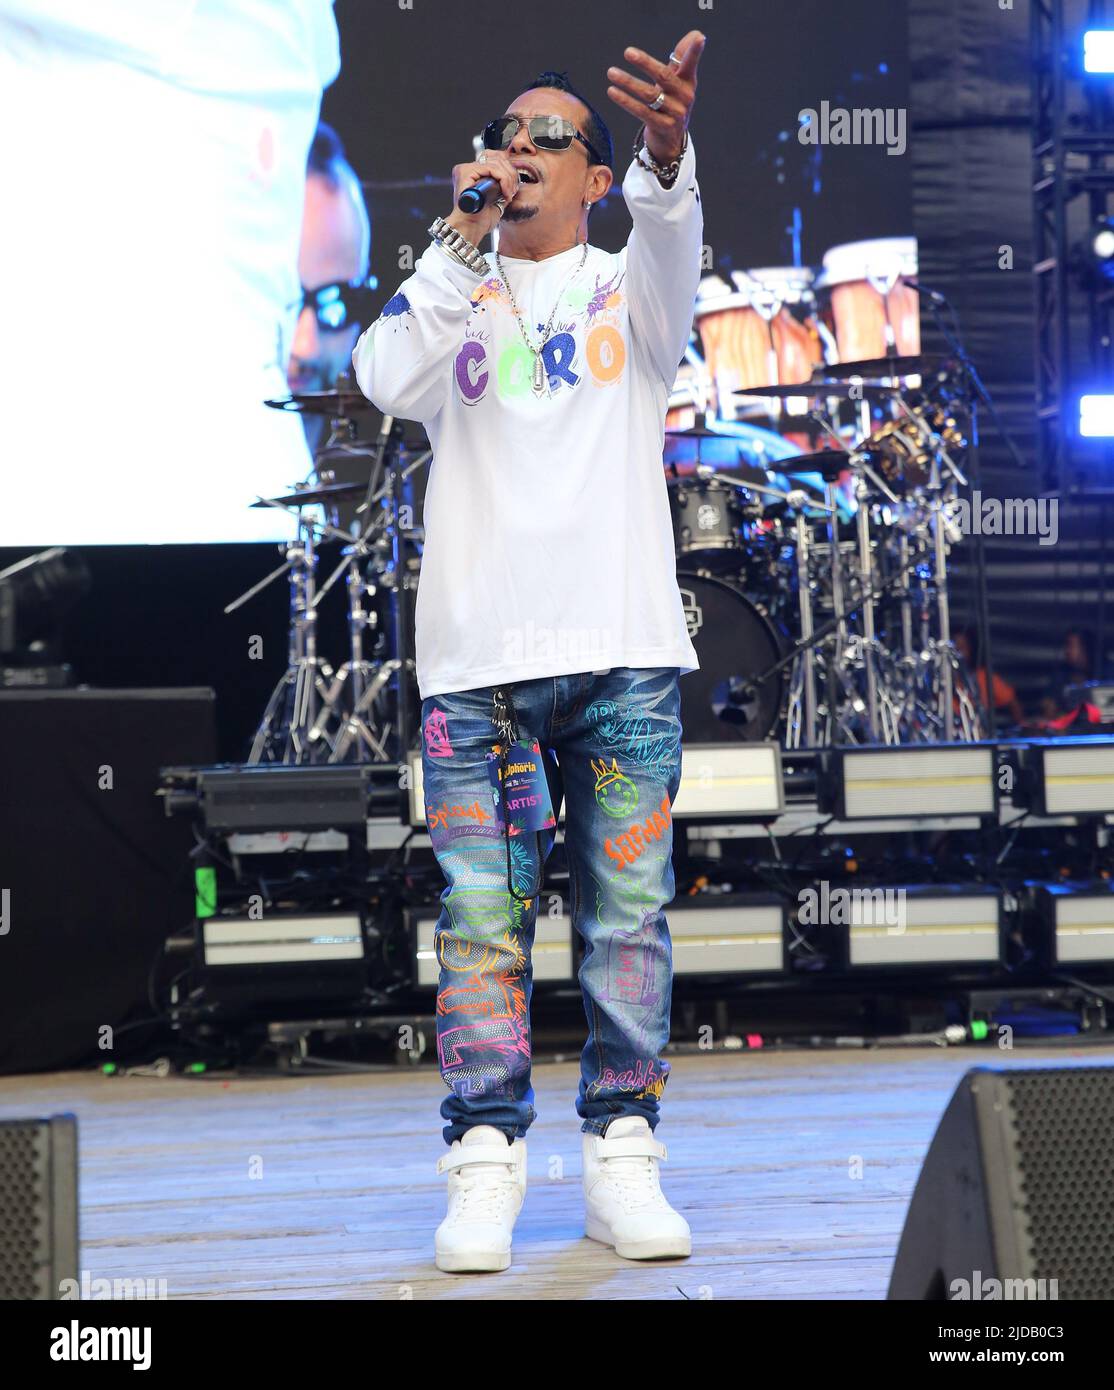 Wantagh, NY, USA. 18th June, 2022. Coro on stage for iHeartMedia New York's 103.5 KTUphoria 2022 Concert, Jones Beach Theater, Wantagh, NY June 18, 2022. Credit: J. Lingo/Everett Collection/Alamy Live News Stock Photo